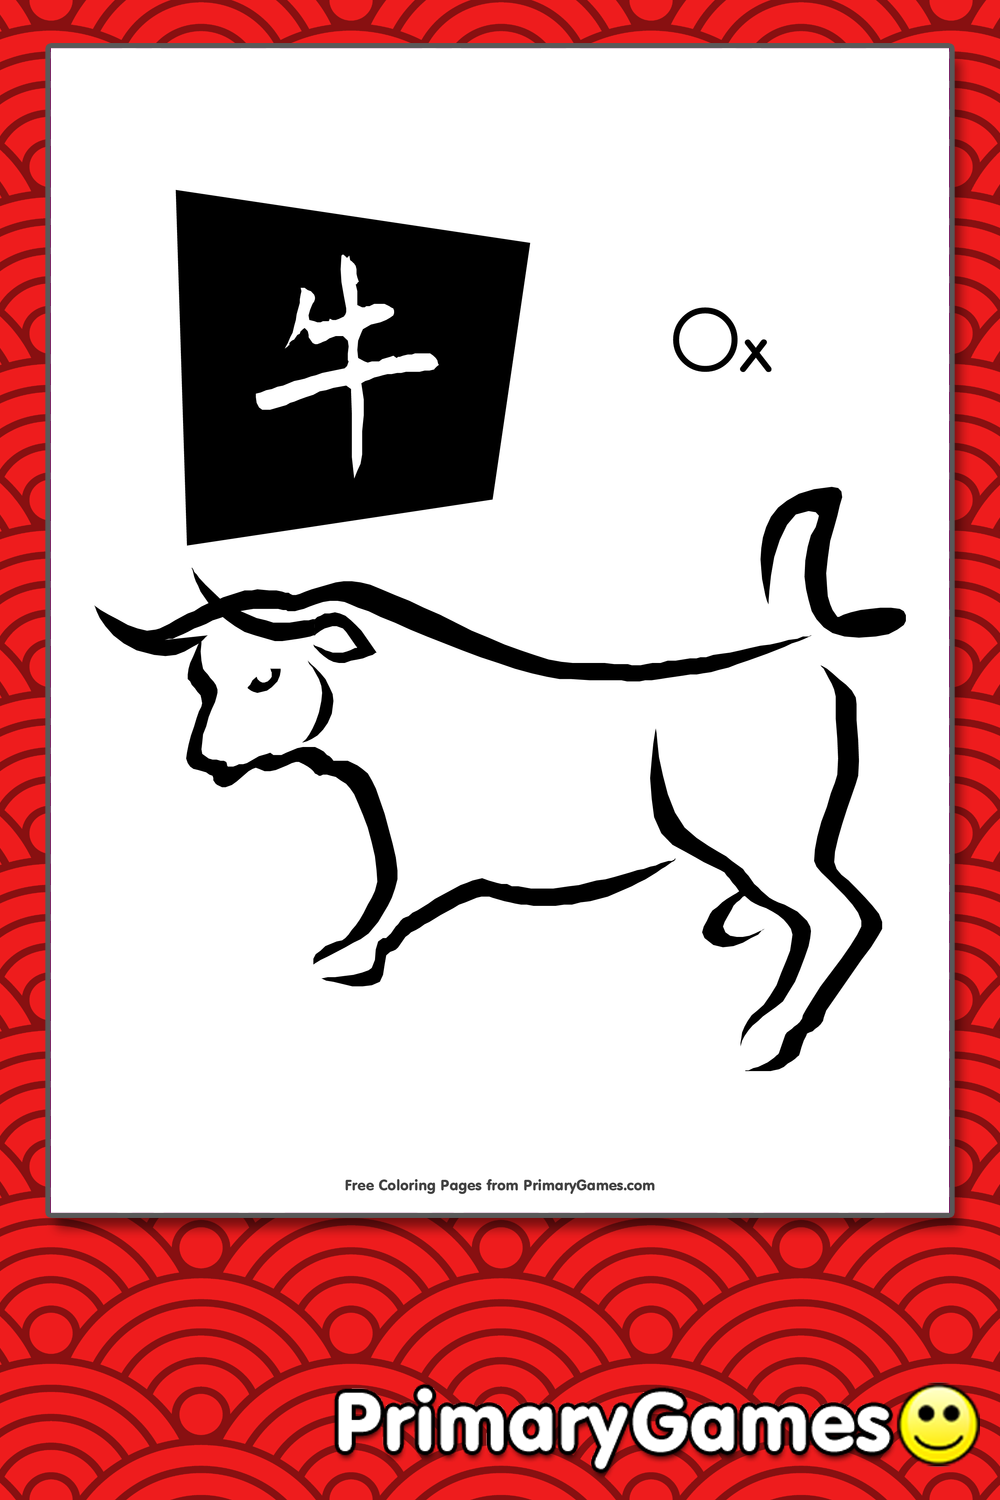 Download Chinese Zodiac Ox Coloring Page Free Printable Pdf From Primarygames